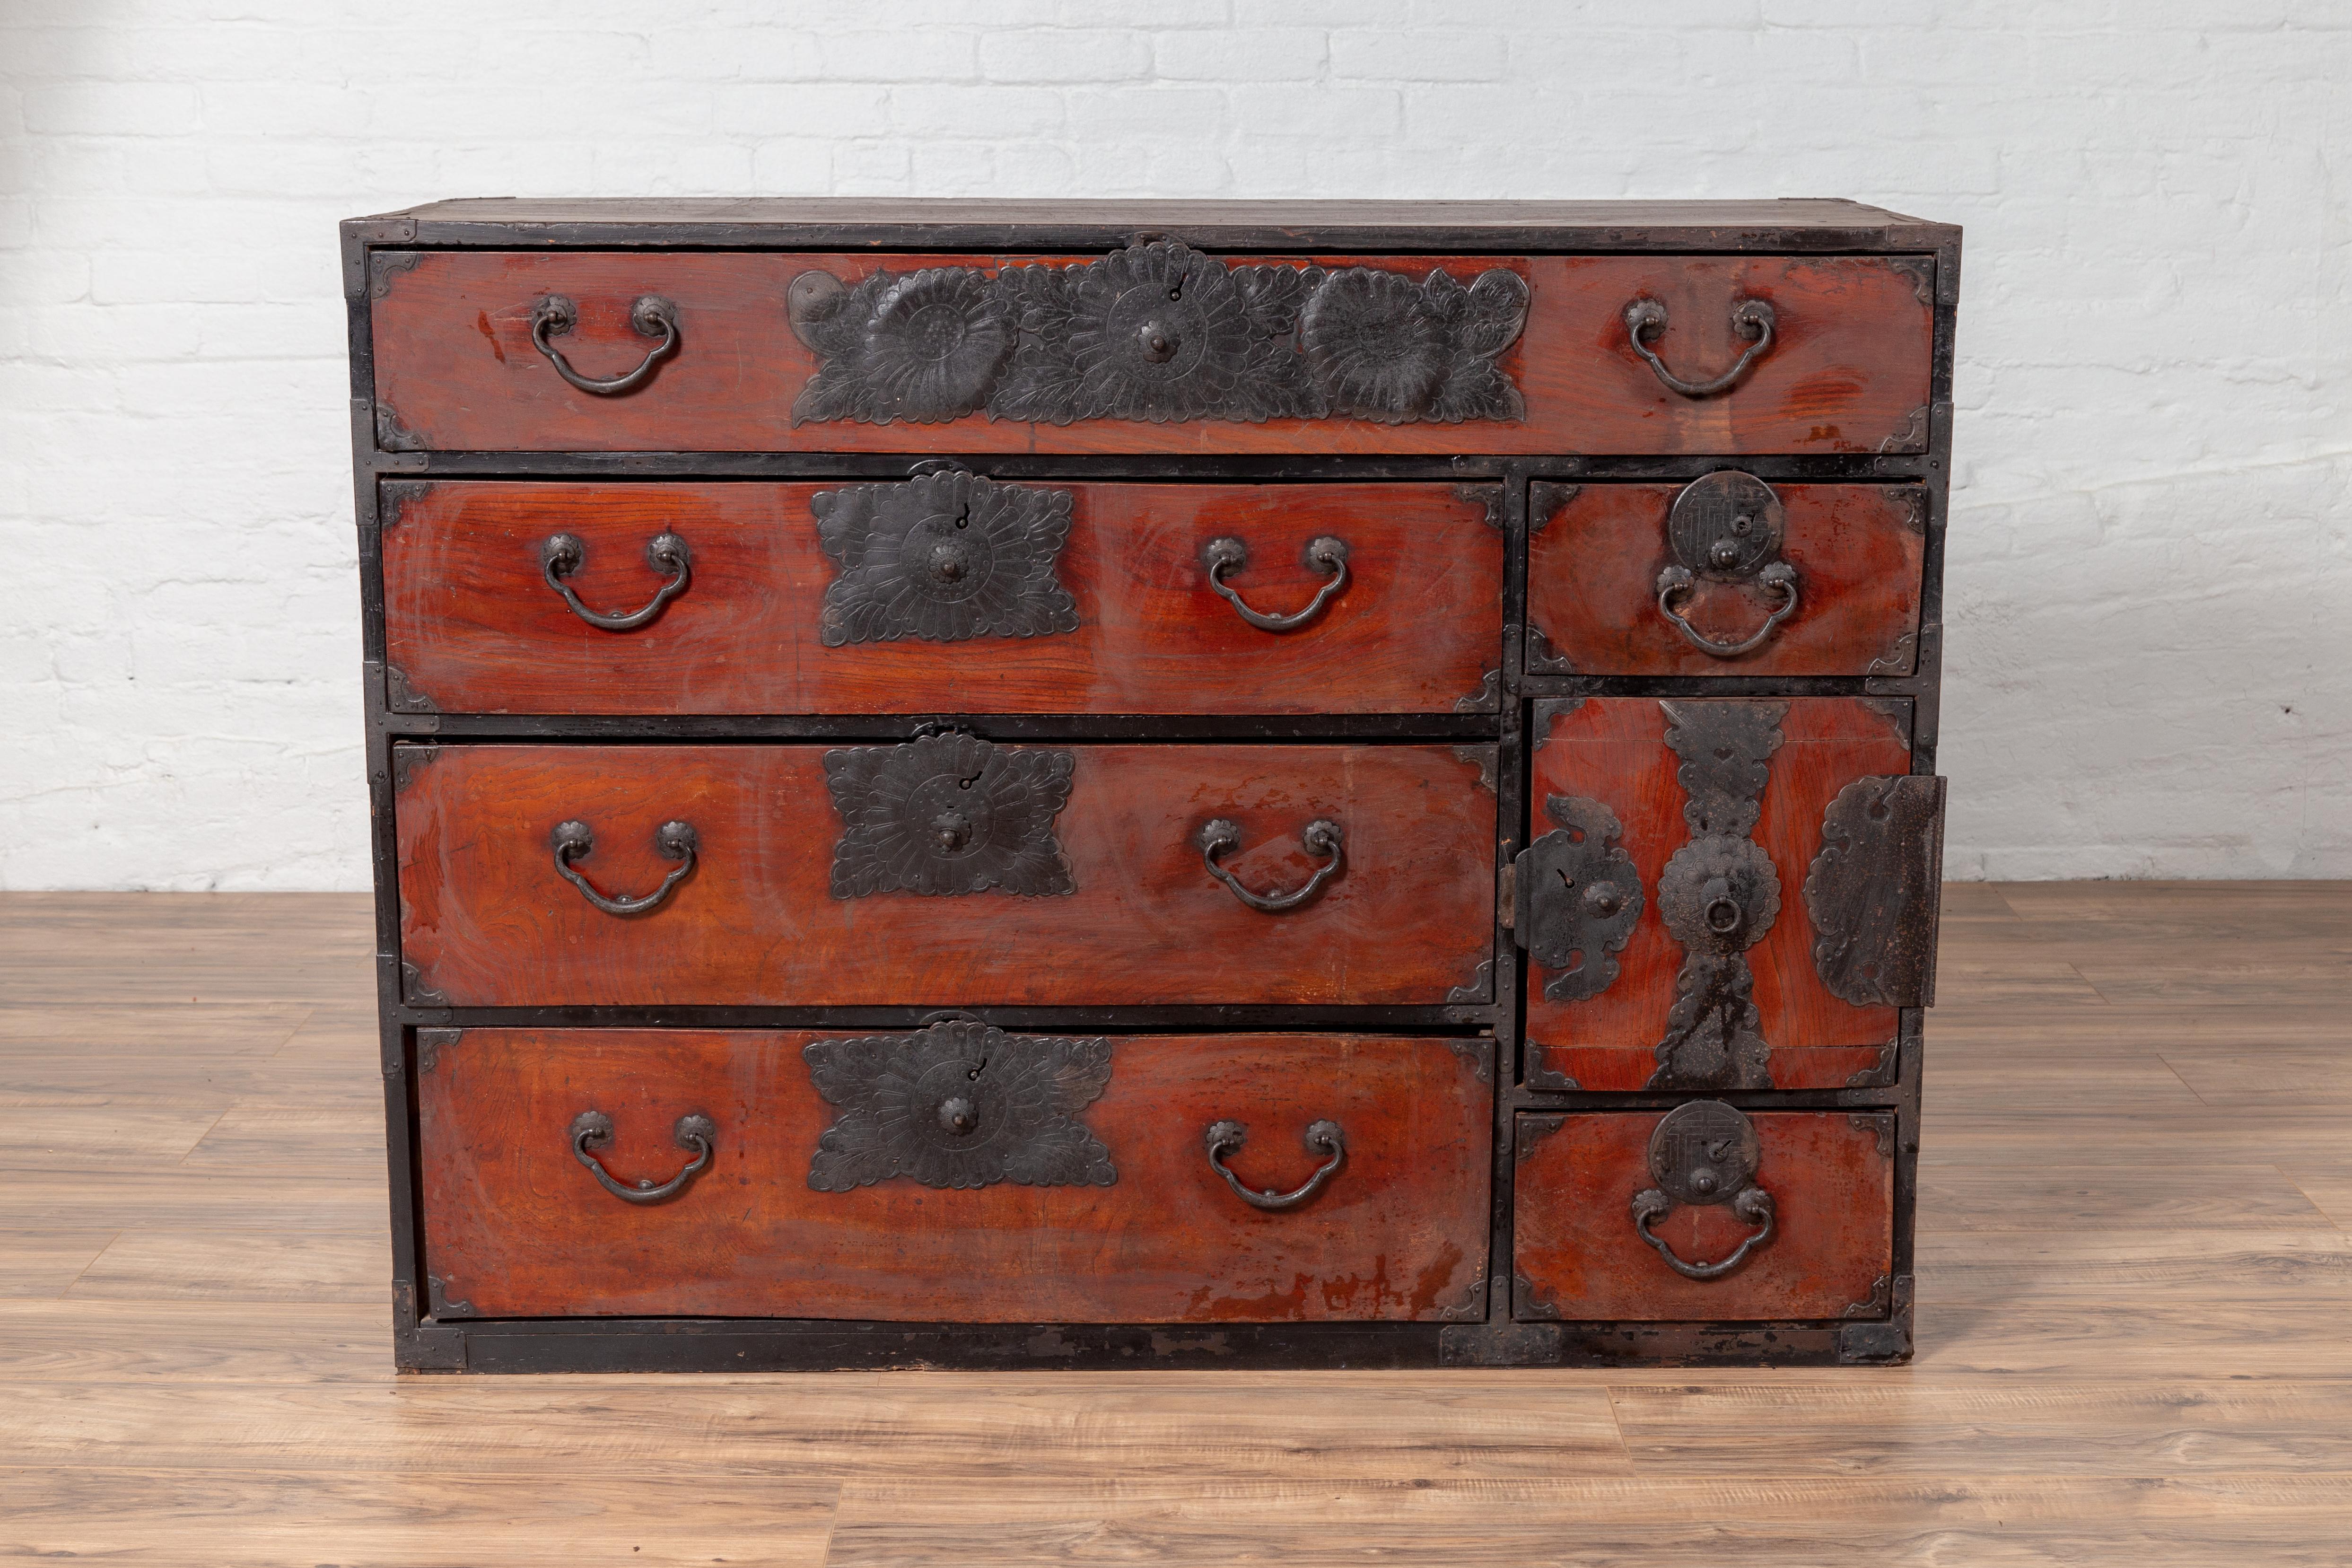 A Japanese Meiji period tansu clothing chest in the Sendai Isho-dansu style, made of Keyaki wood with hand-cut iron hardware. Born during the 19th century, this keyaki (elm) wood tansu is a fine example of Japan's traditional mobile cabinetry.